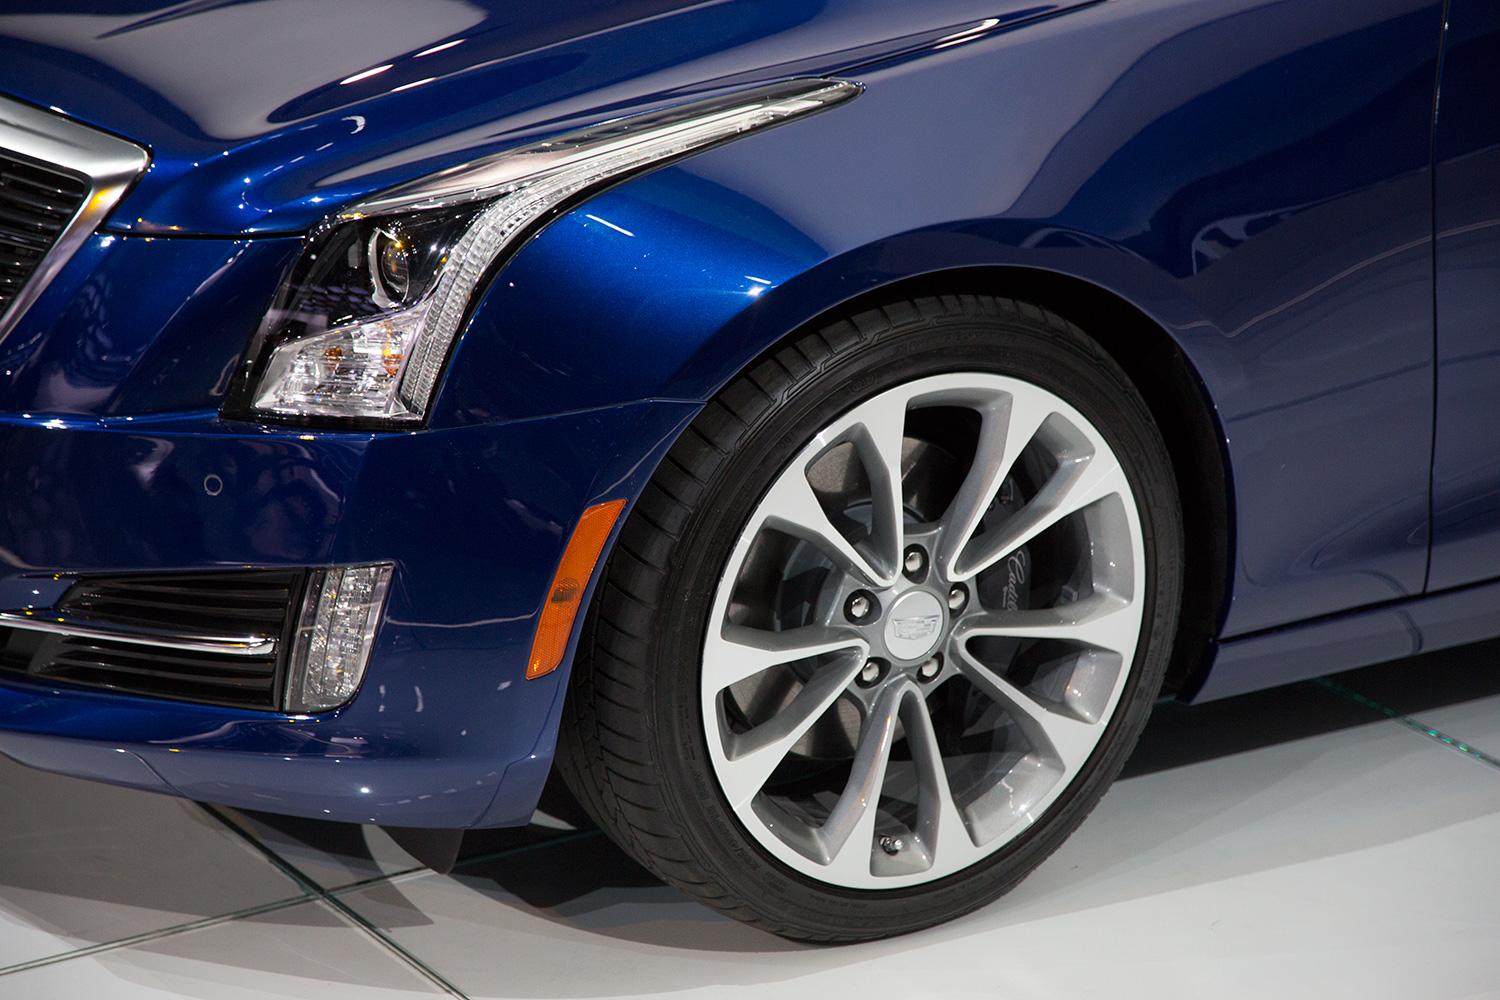 2015 Cadillac ATS Coupe front left macro